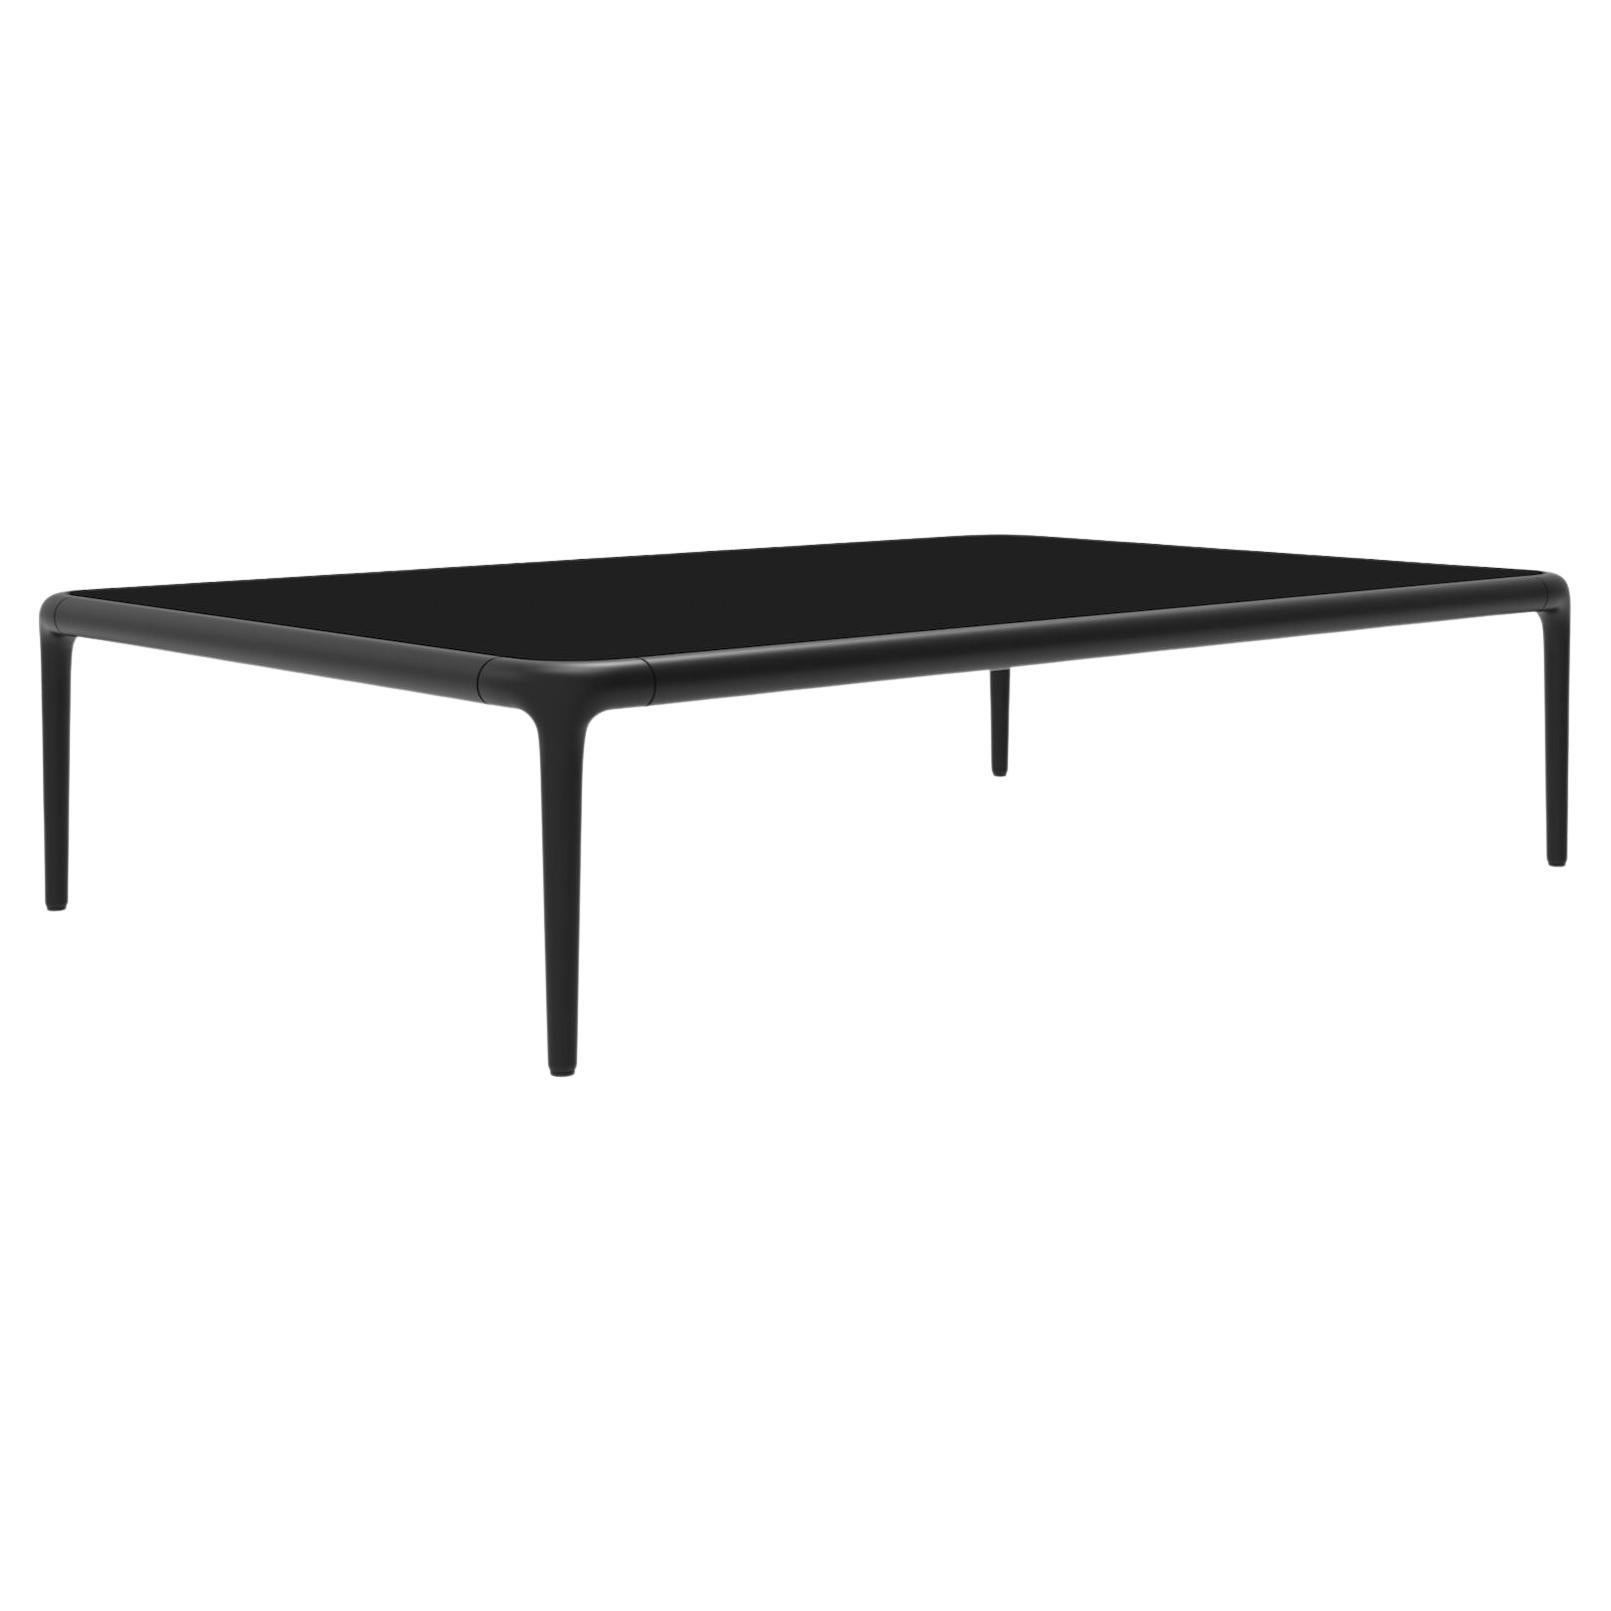 Xaloc Black Coffee Table 120 with Glass Top by Mowee For Sale